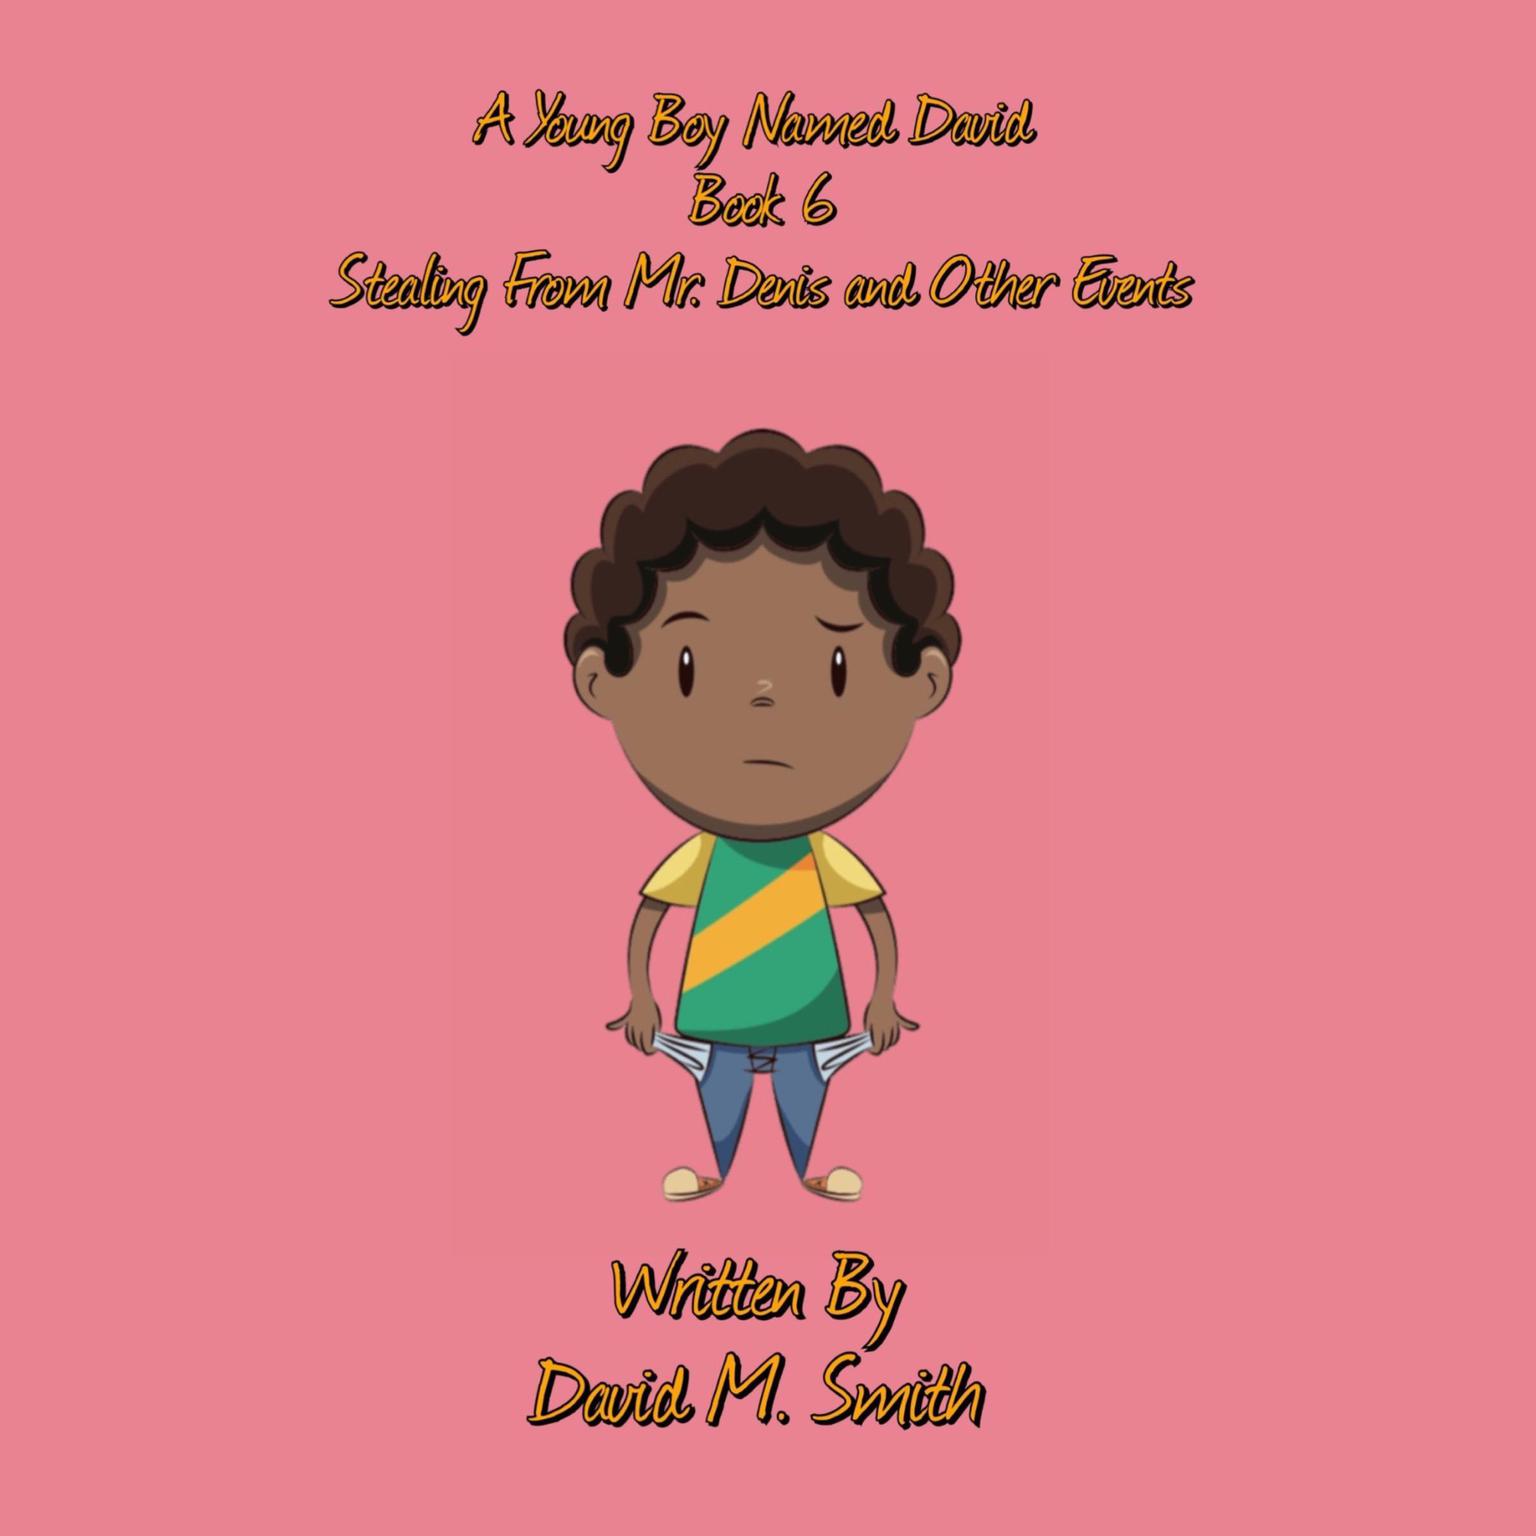 A Young Boy Named David Book 6: Stealing From Mr. Denis and Other Events Audiobook, by David M. Smith